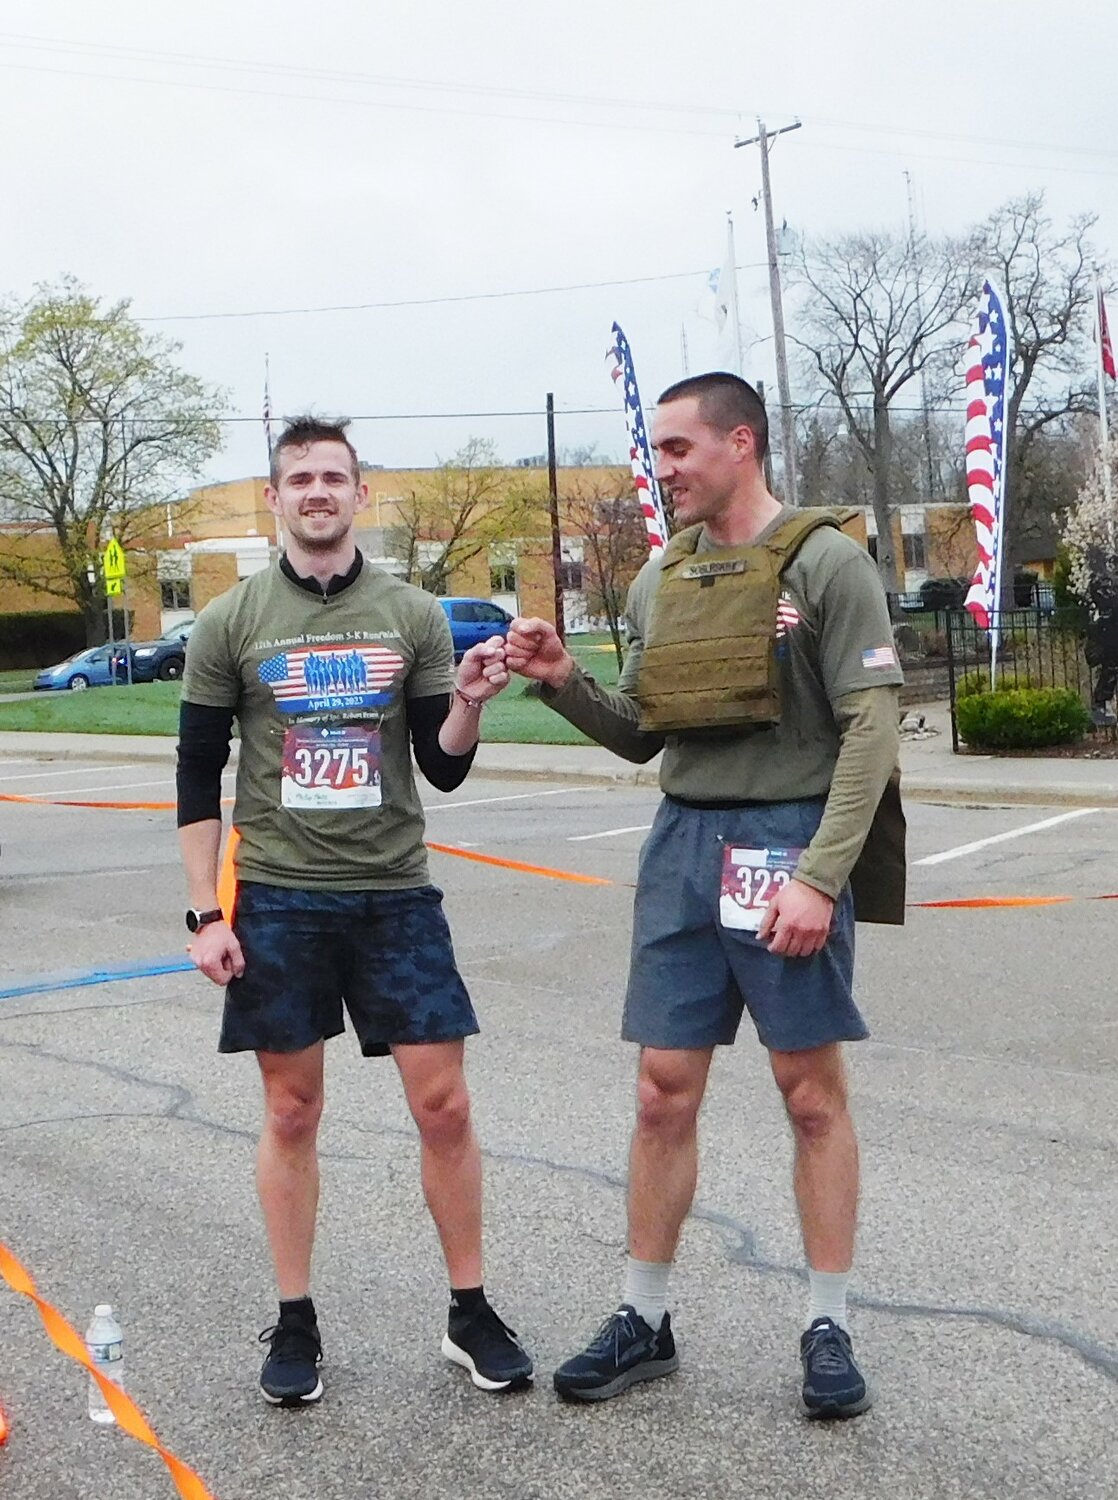 Tyler Sobleskey, right, and Phillip Hale share a fist-bump moment of congratulations after crossing the finish line first and second, respectively. They crossed completed the race just 10 seconds apart, and were followed in short order by Justice Walraven just 57.4 seconds later.